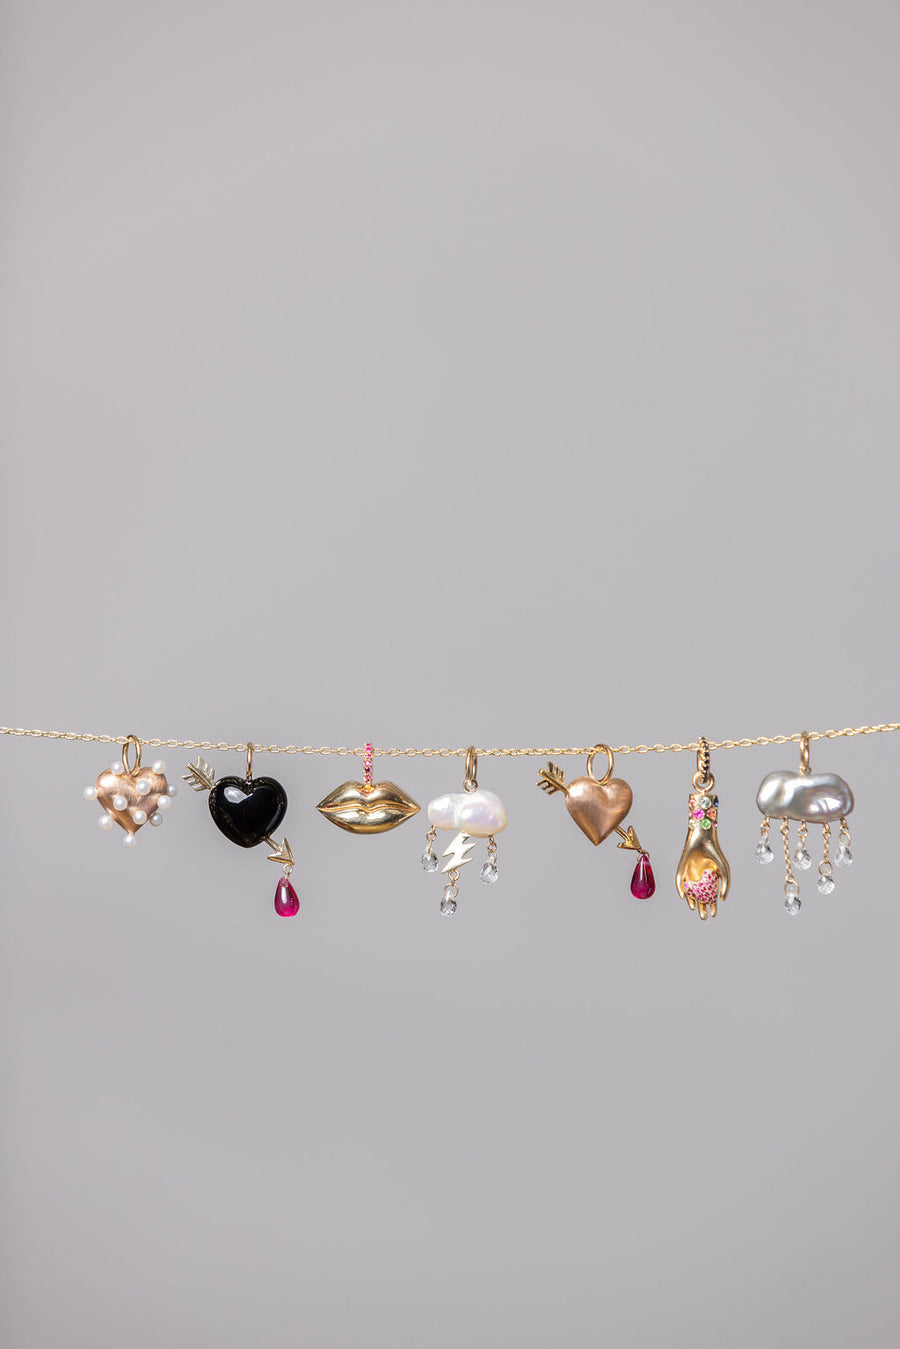 rachel quinn jewelry variations of different charms on a gold horiztonal chain